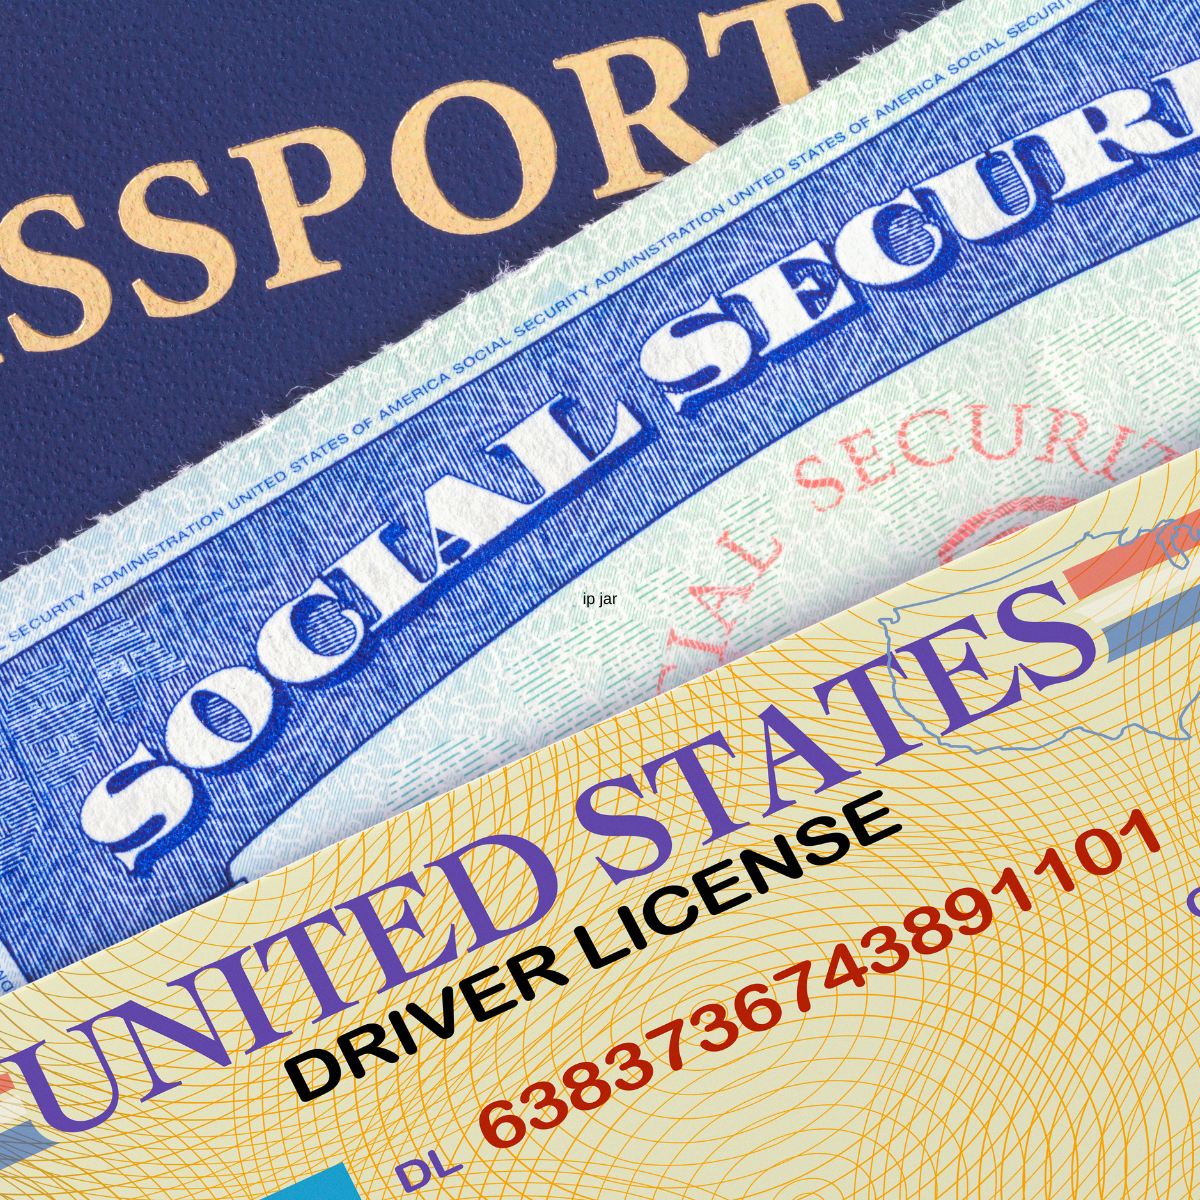 Image of passport, social security card, and drivers license